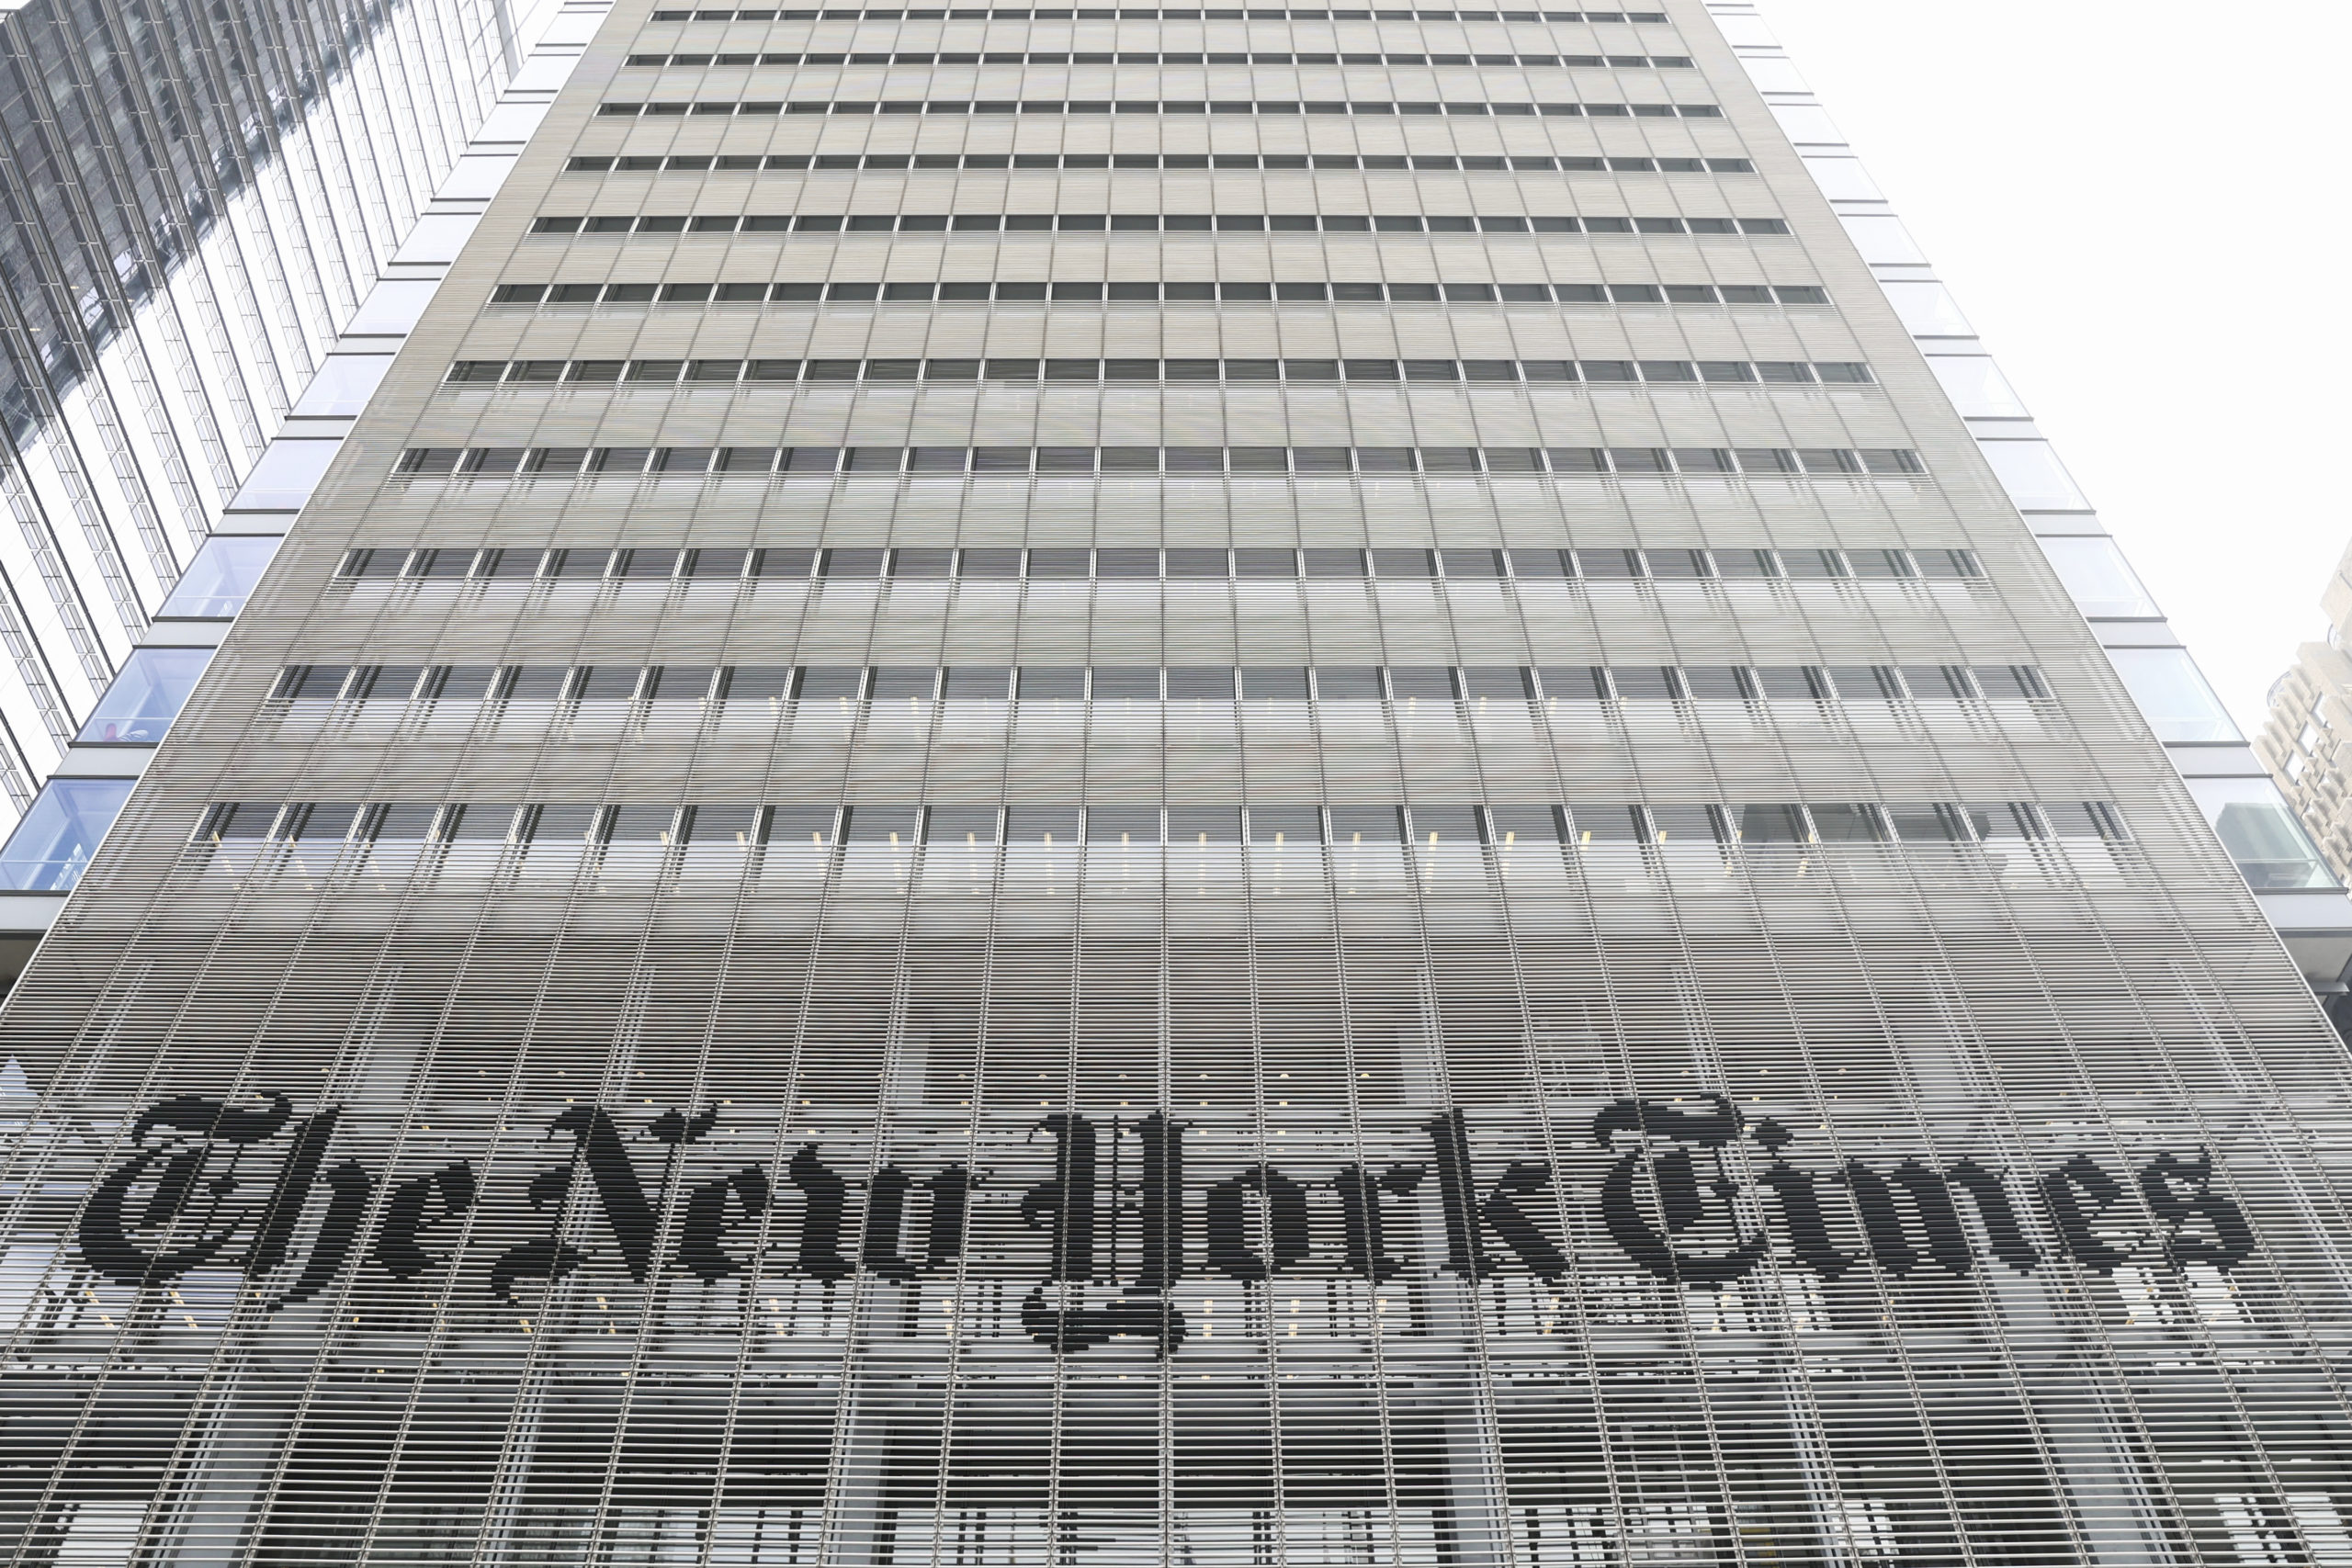 The New York Times building in New York City, October 2022